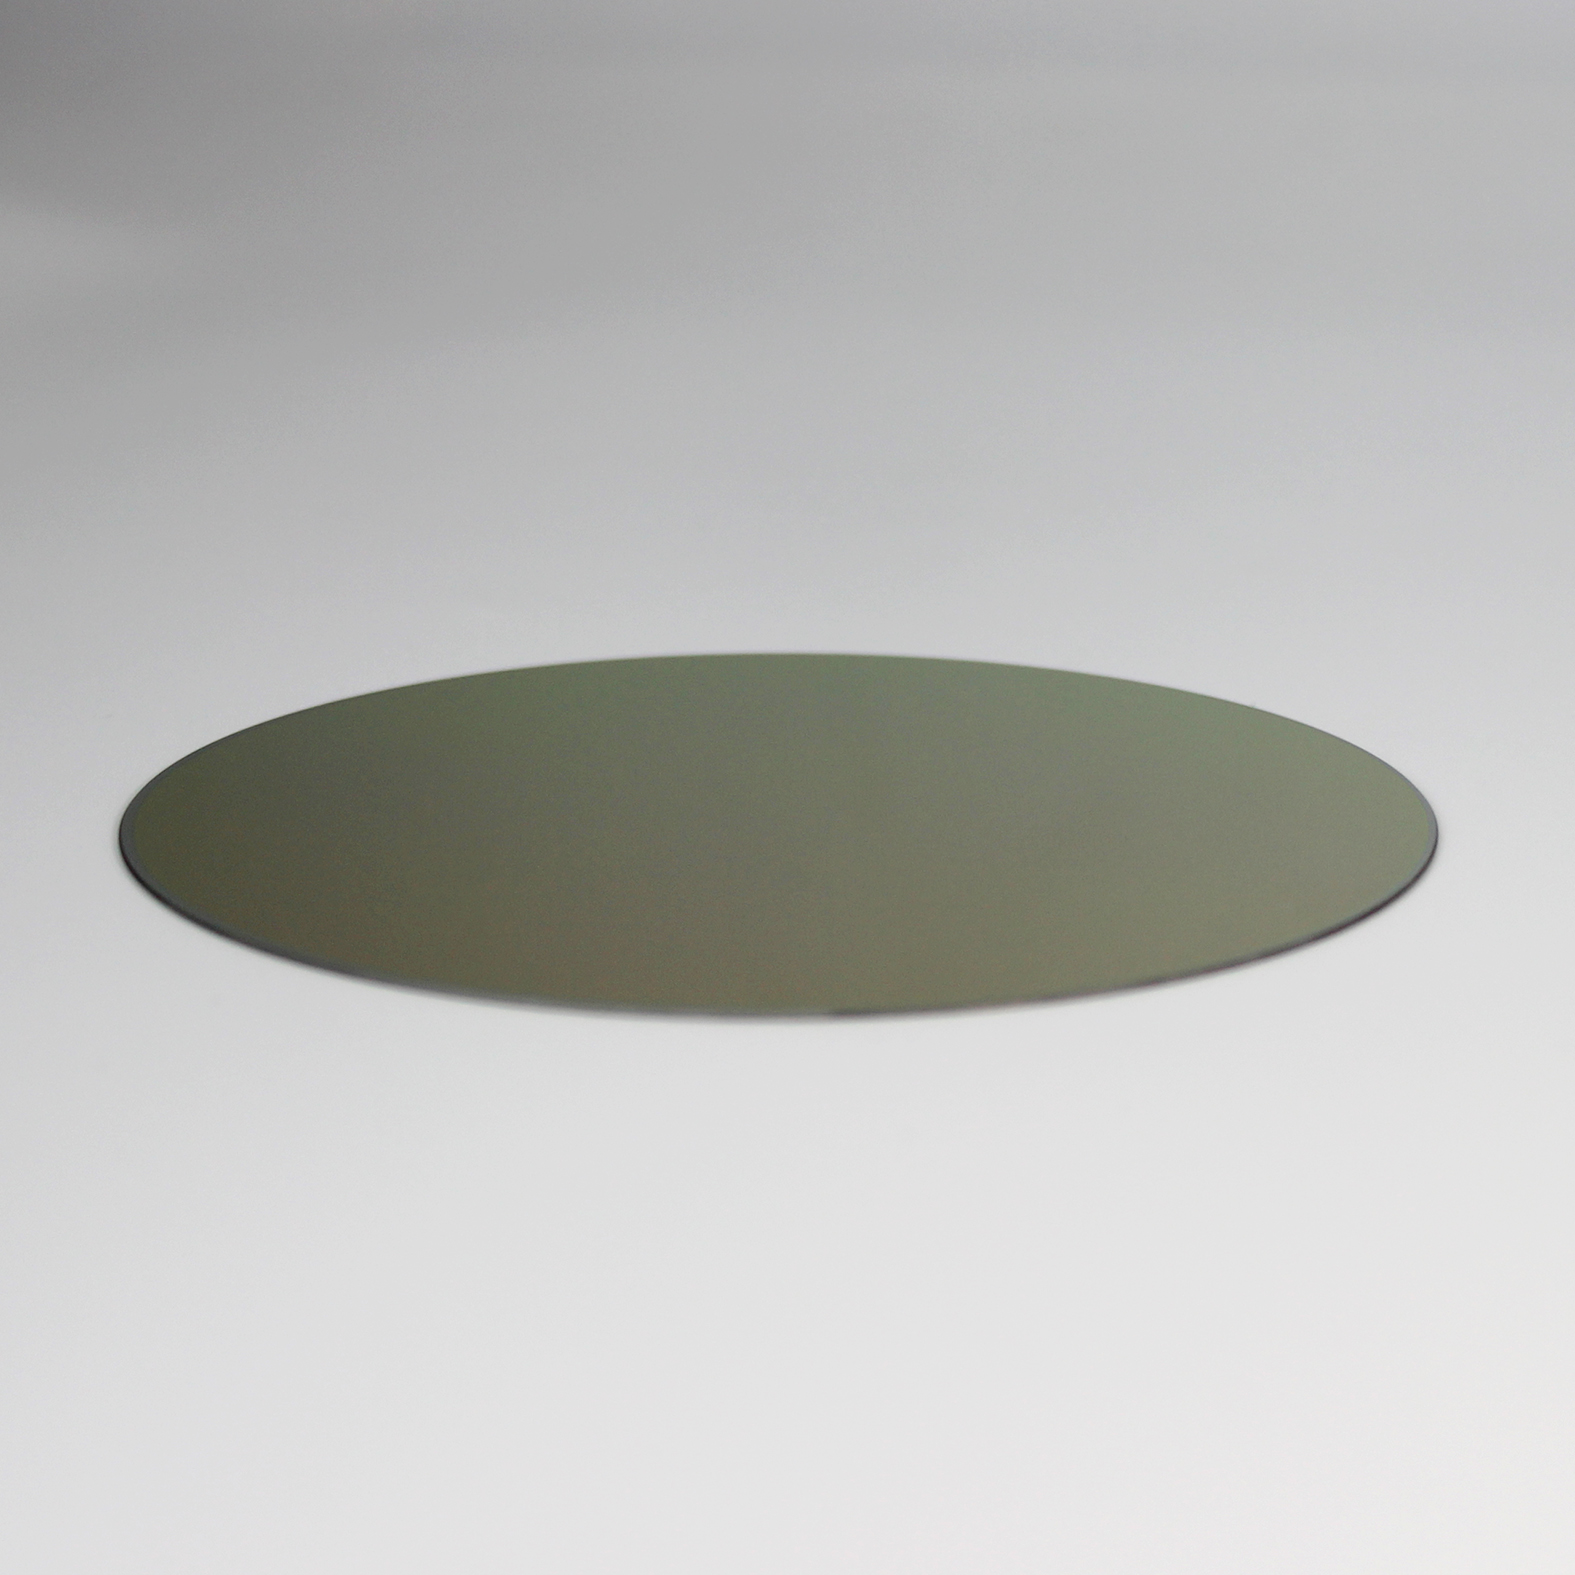 High Quality 100mm Optical IR Ge Germanium Wafer with AR Coating